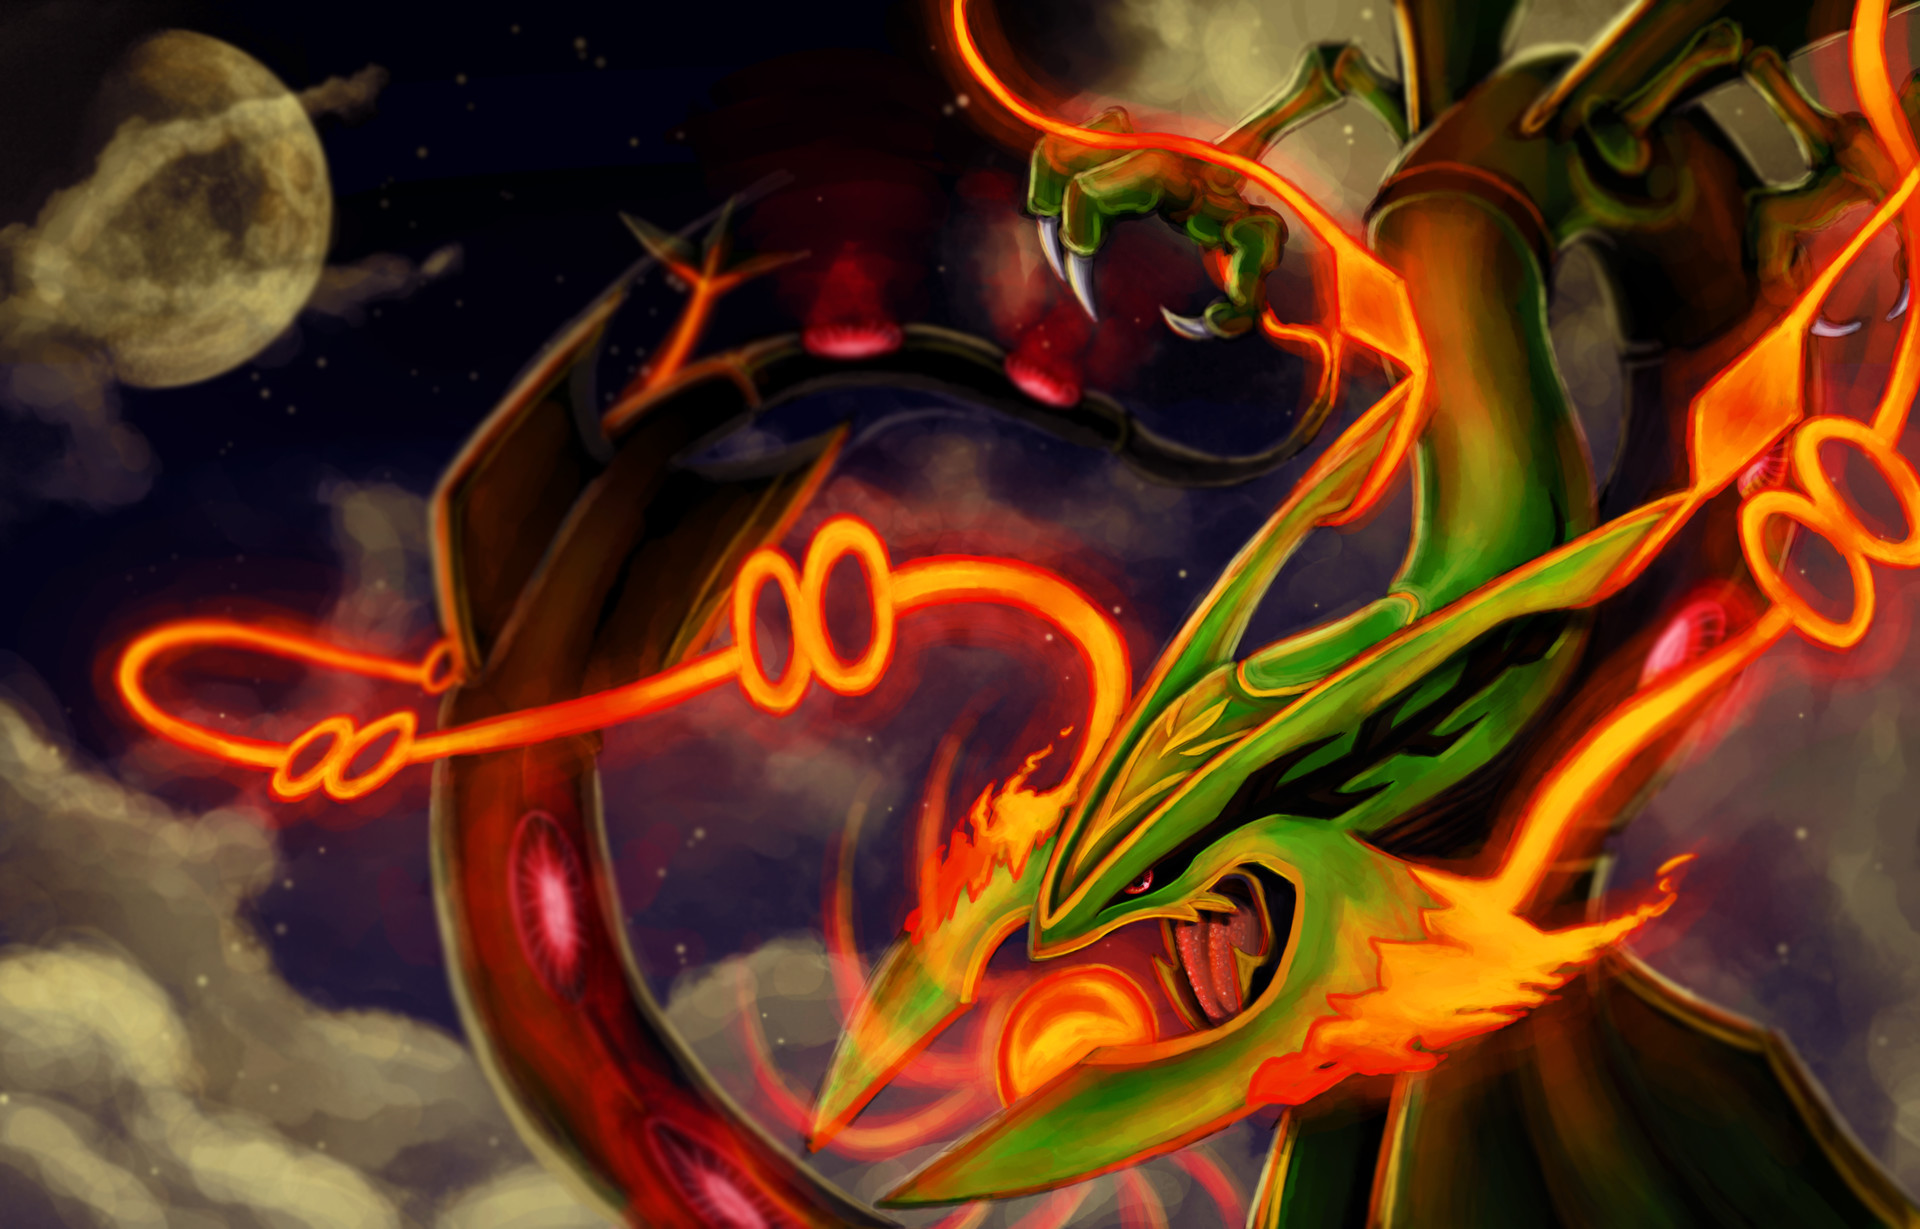 Been working on this shiny mega rayquaza digital art, a mega and